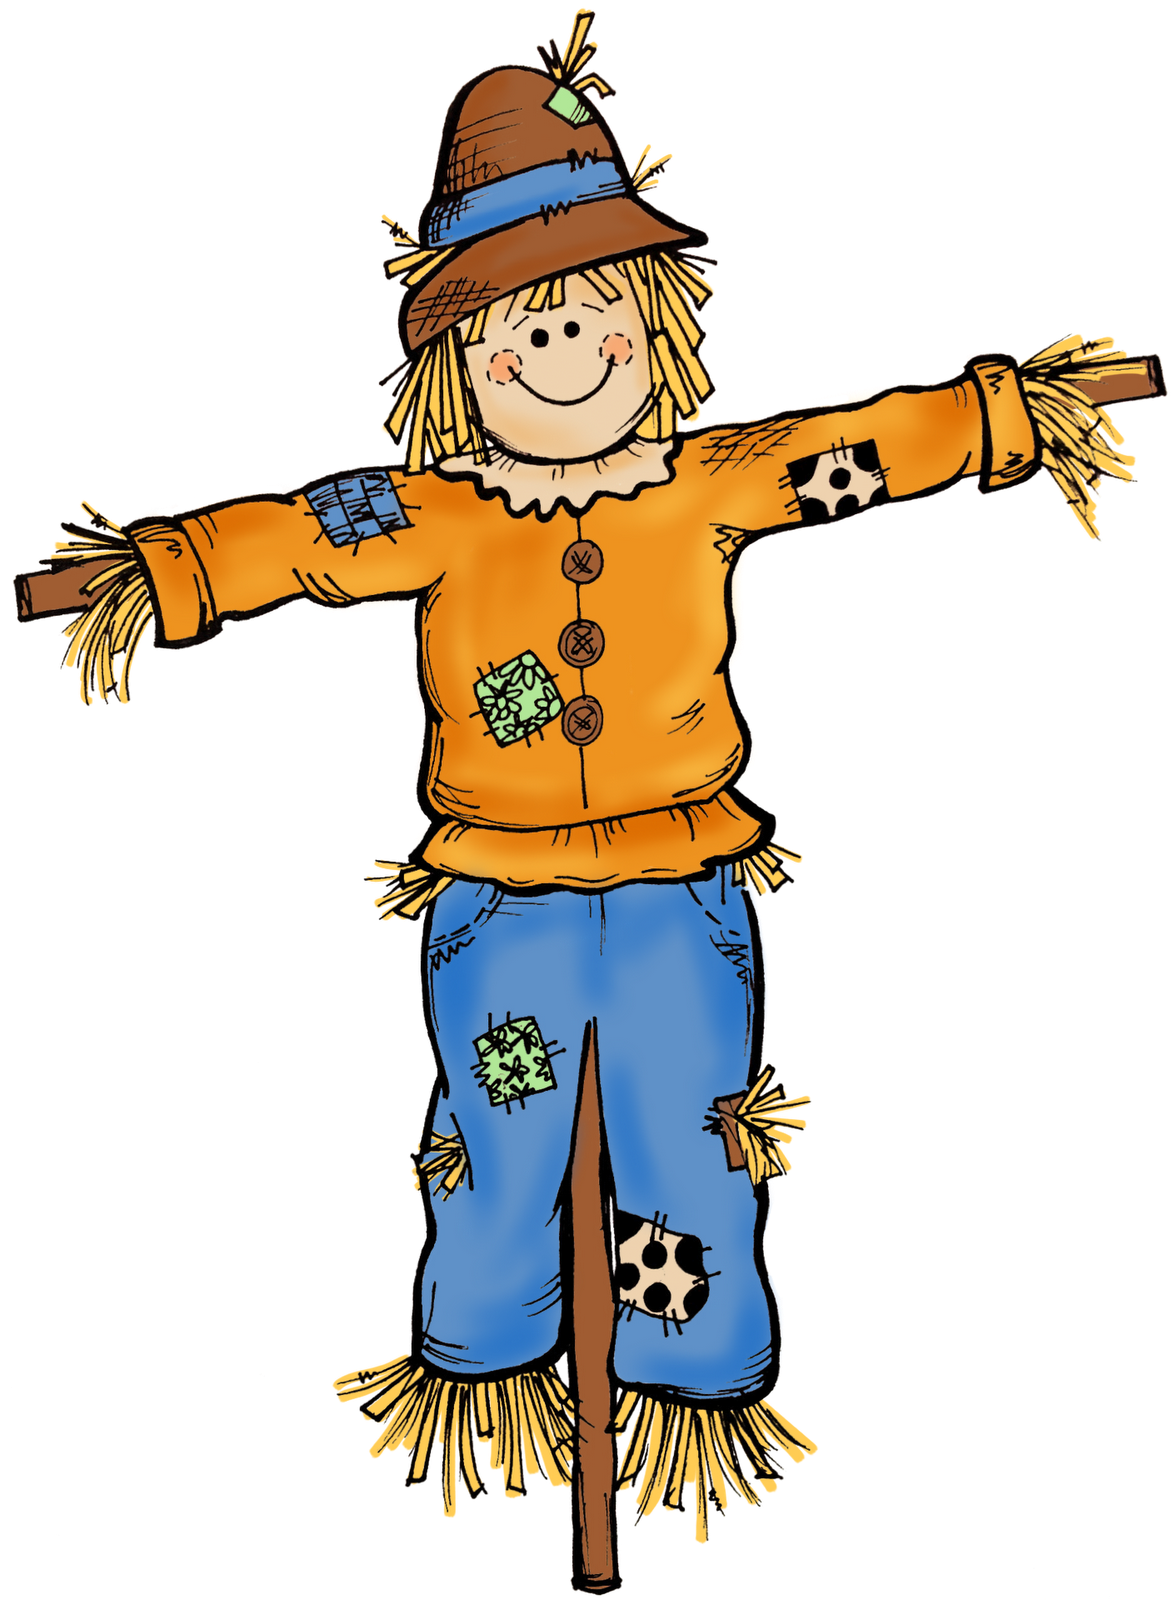 Autumn Scarecrow drawing free image download